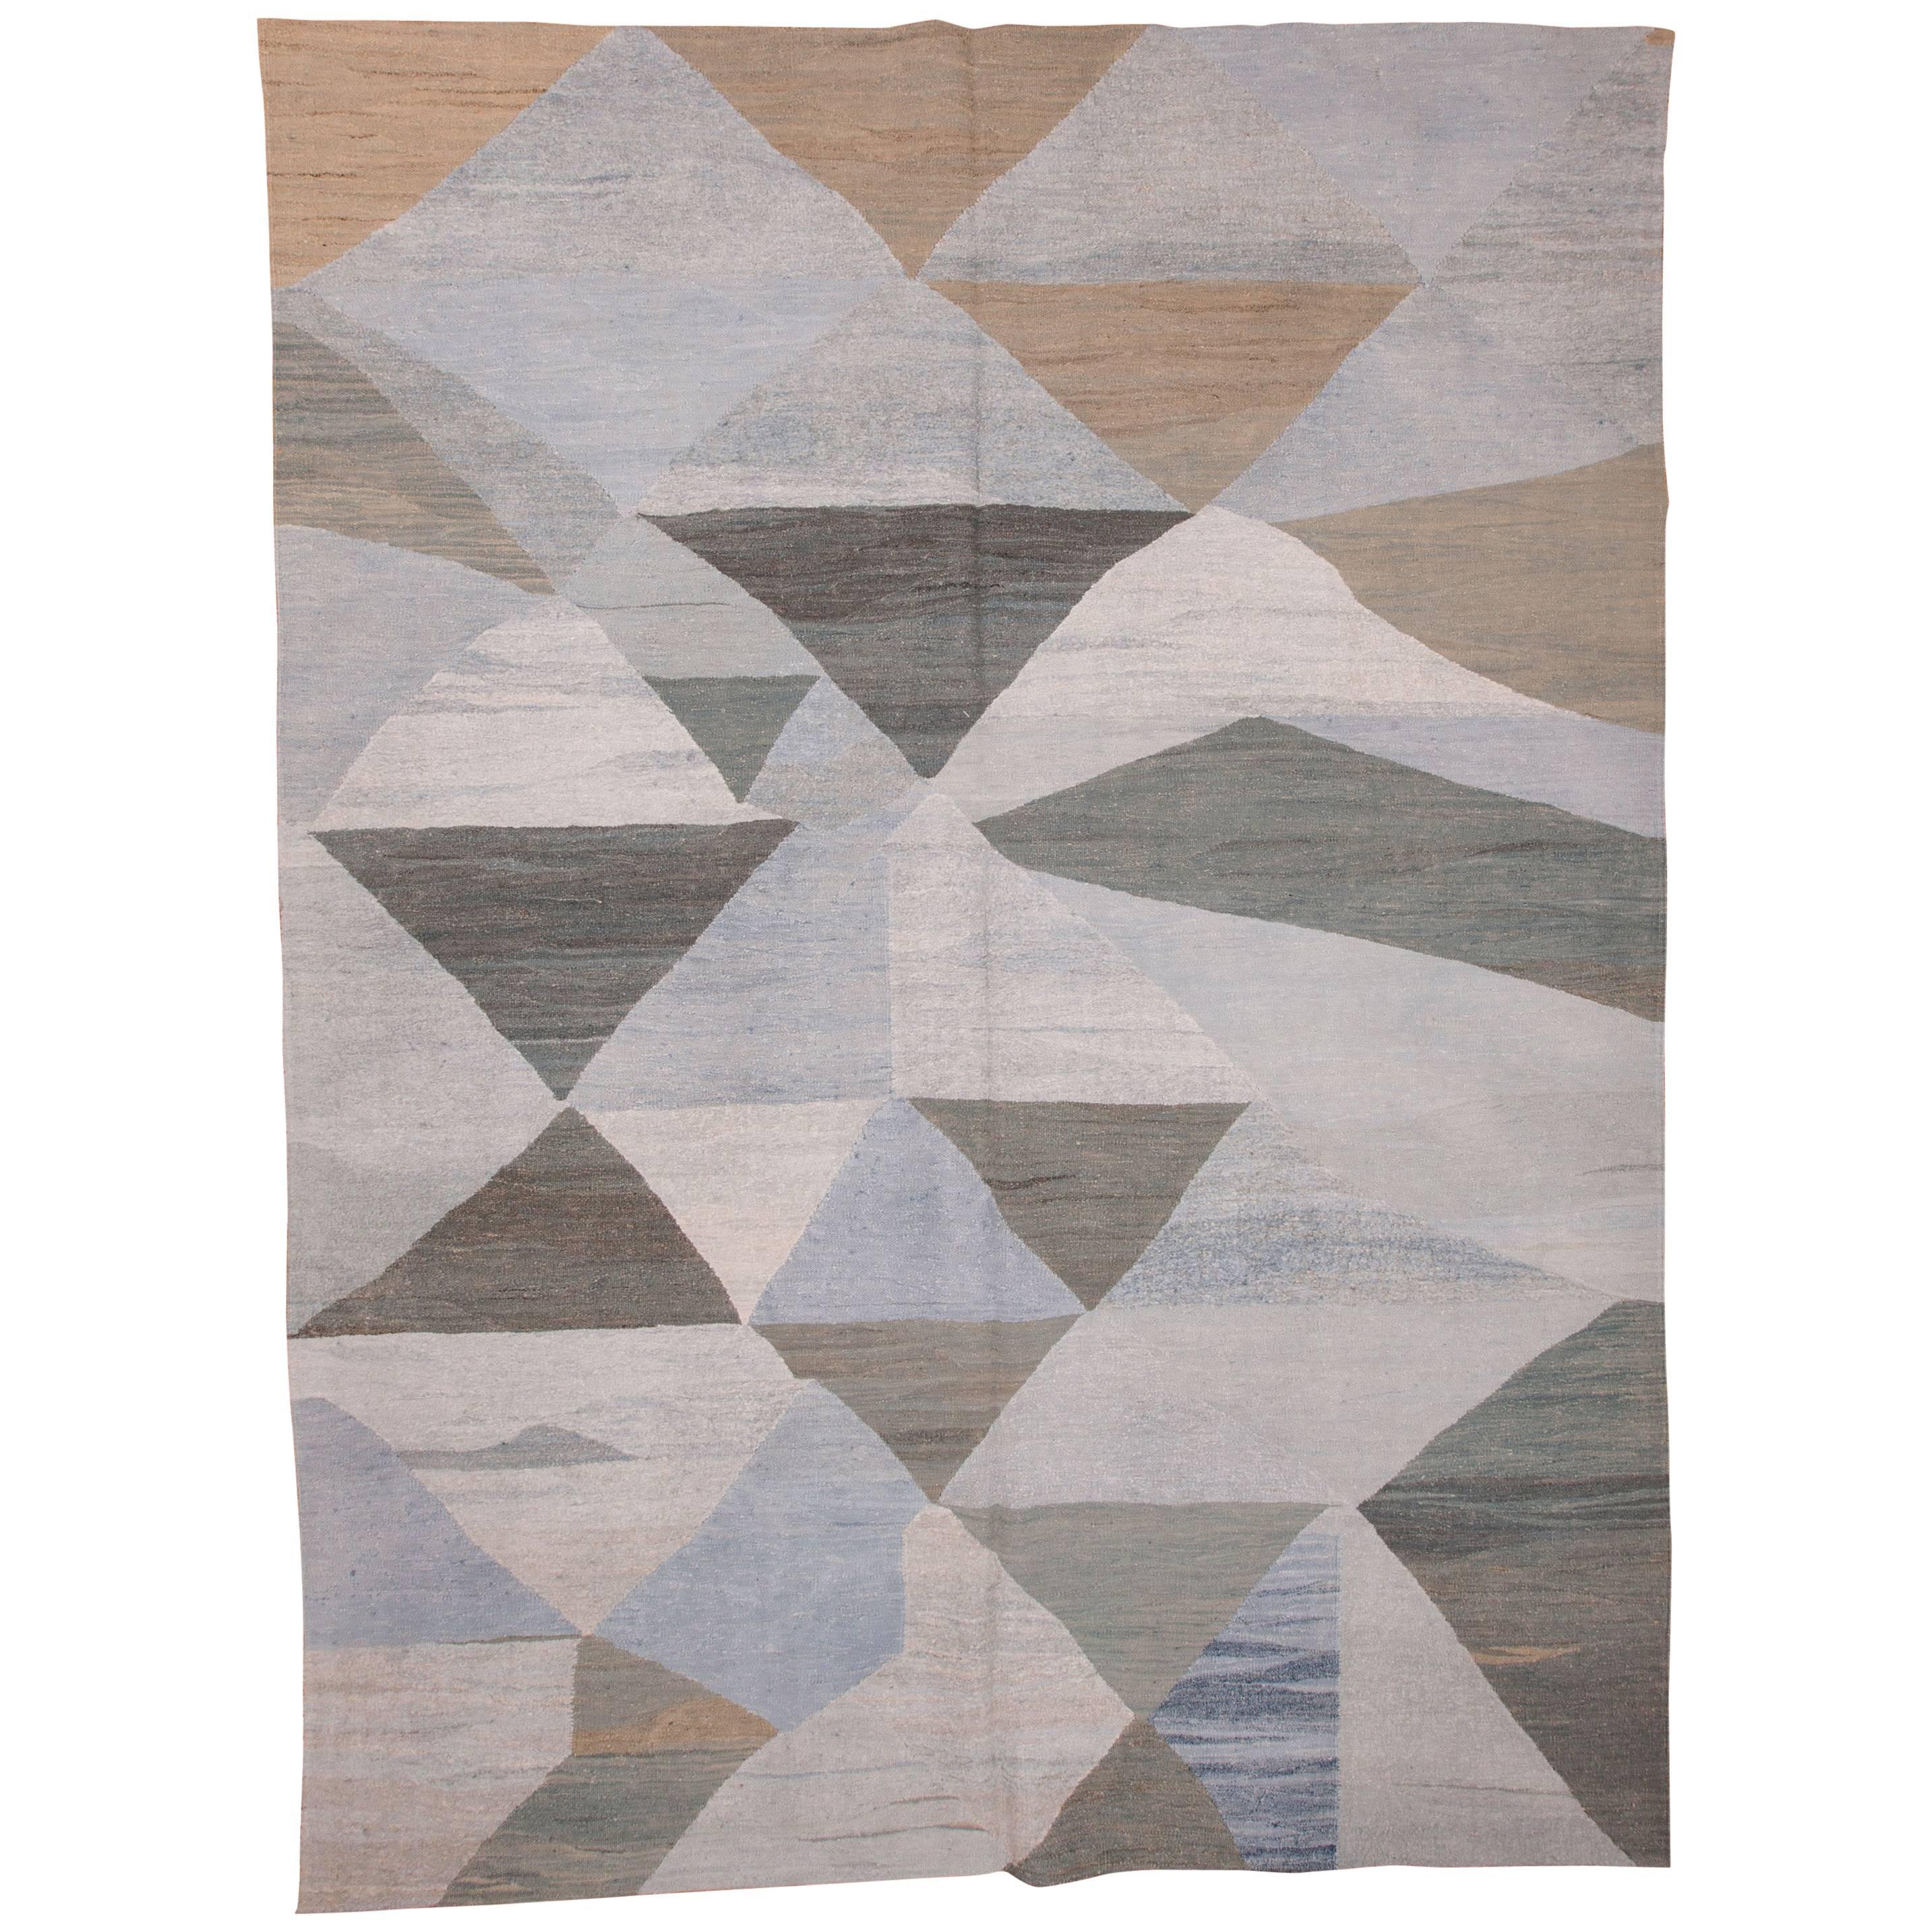 Contemporary Turkish Kilim Made from Recycled Hemp